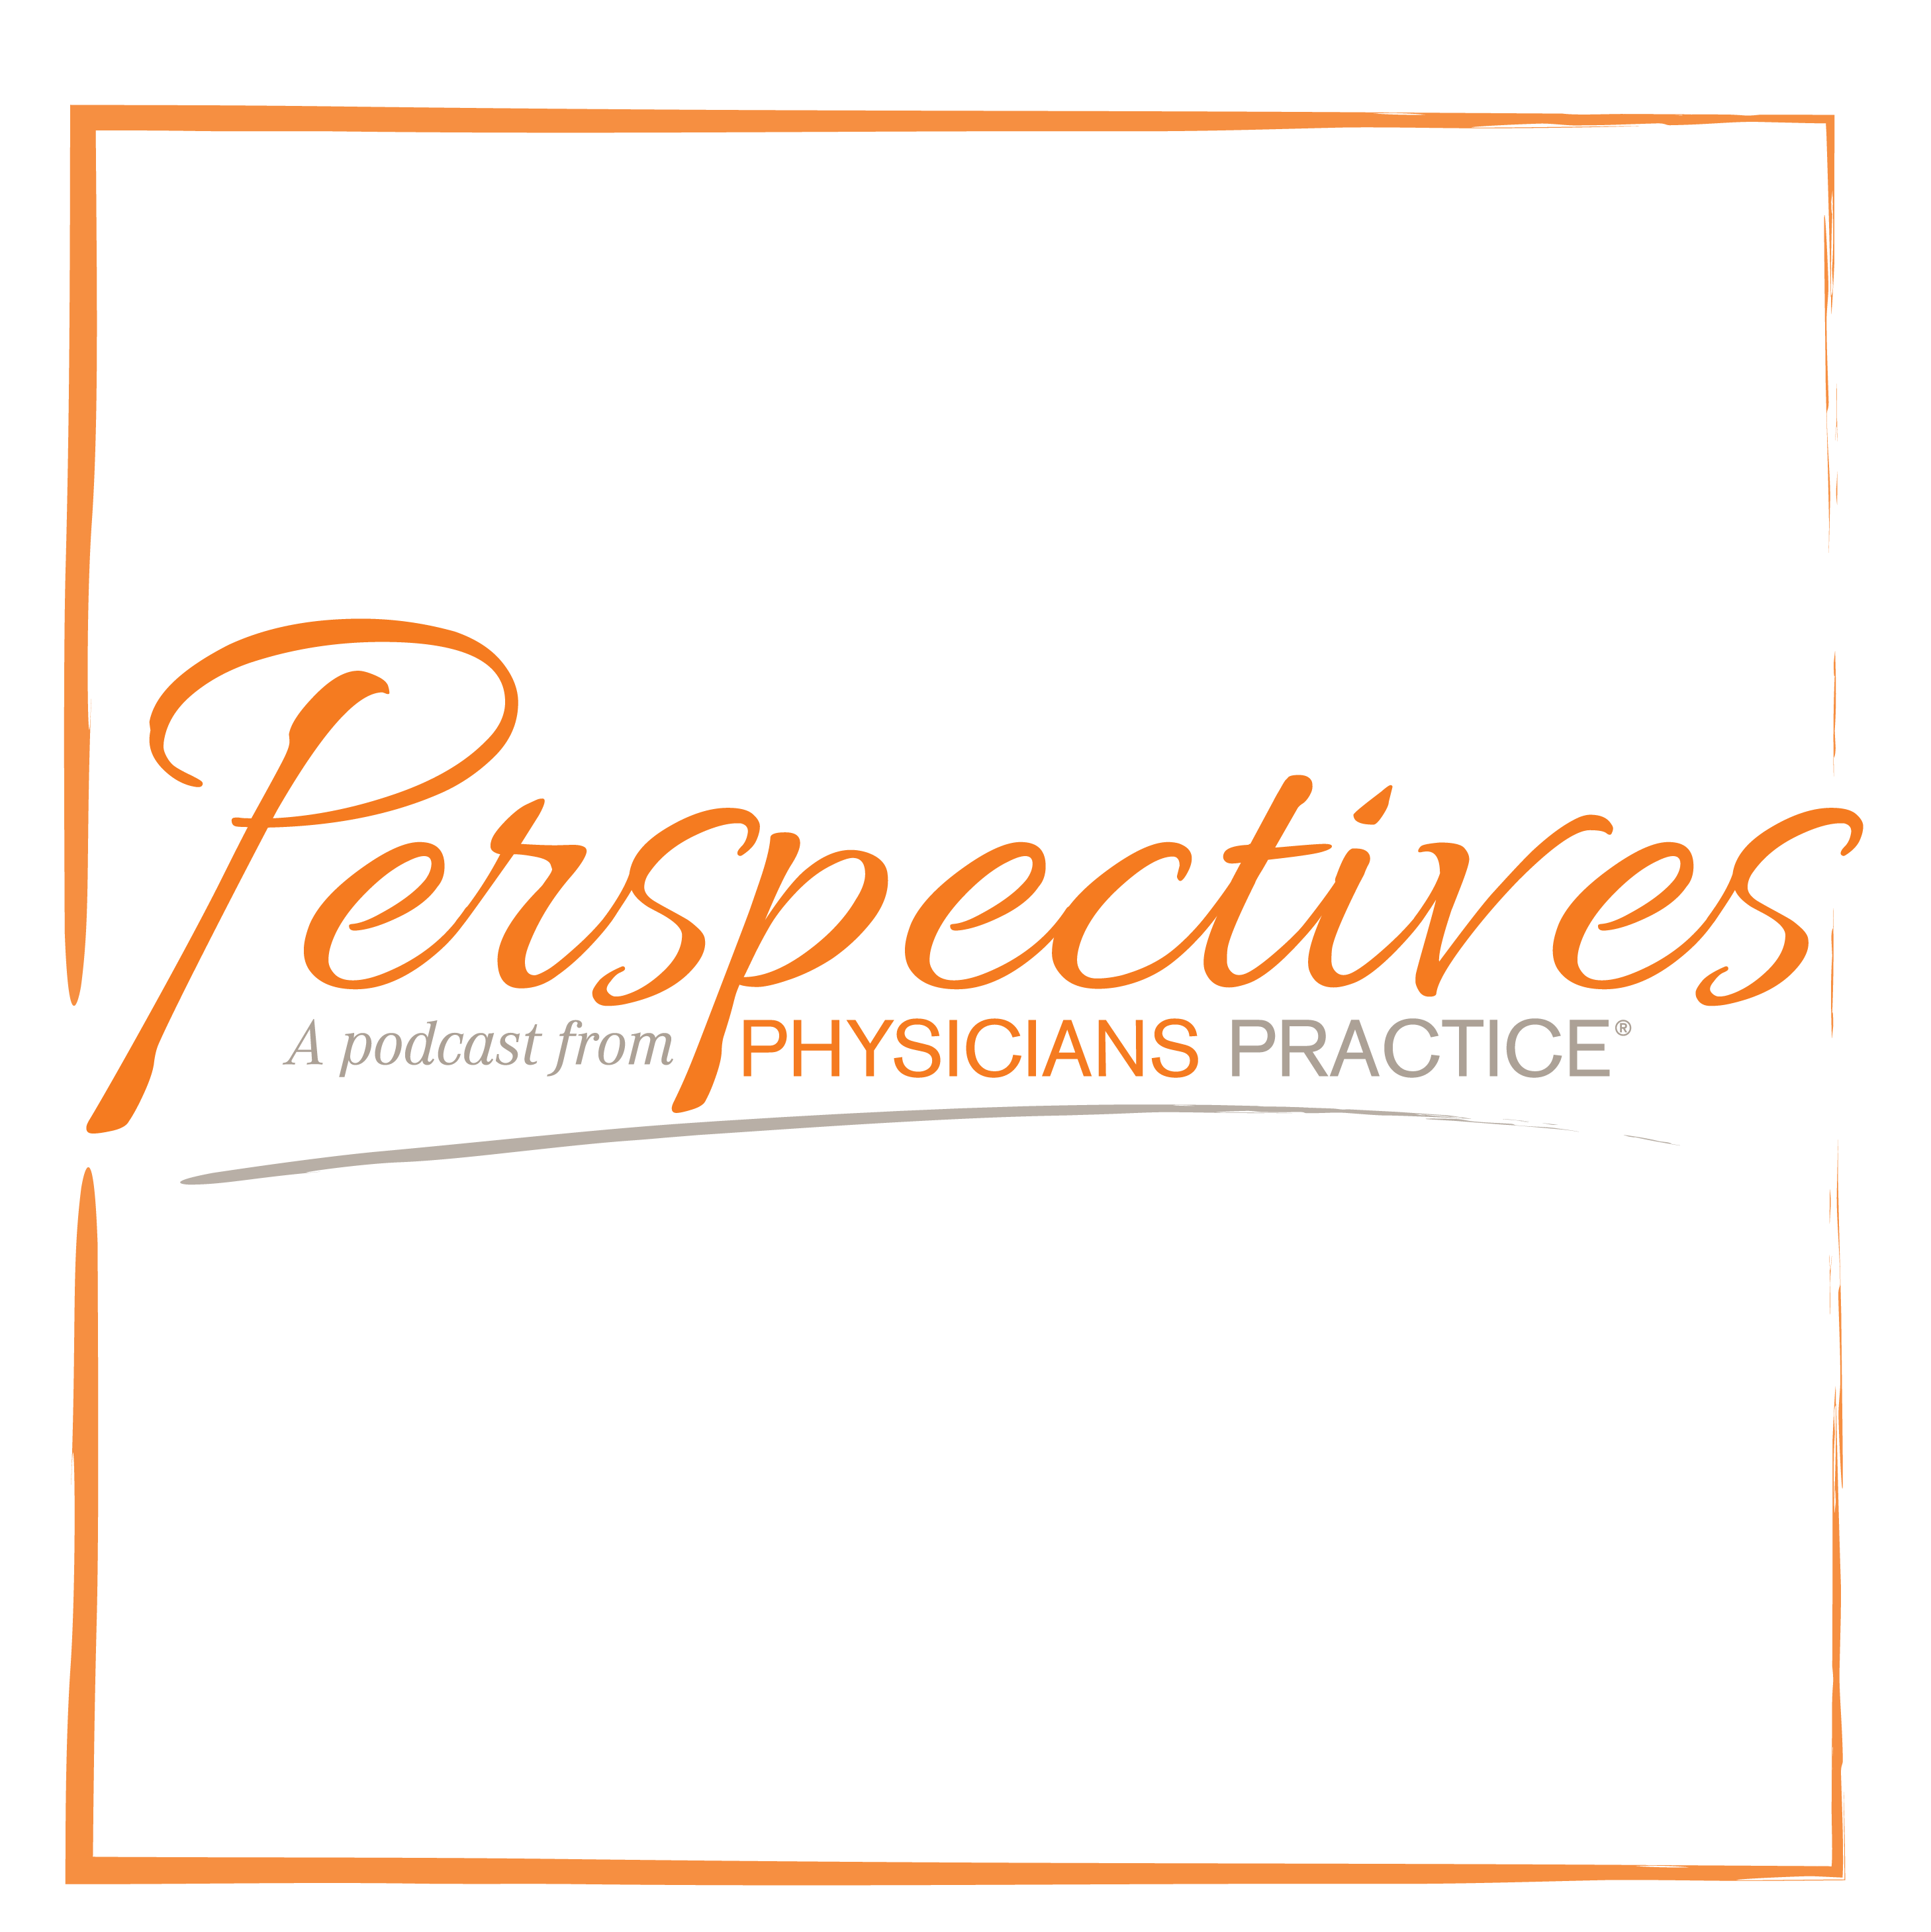 Physician's Practice: Perspectives